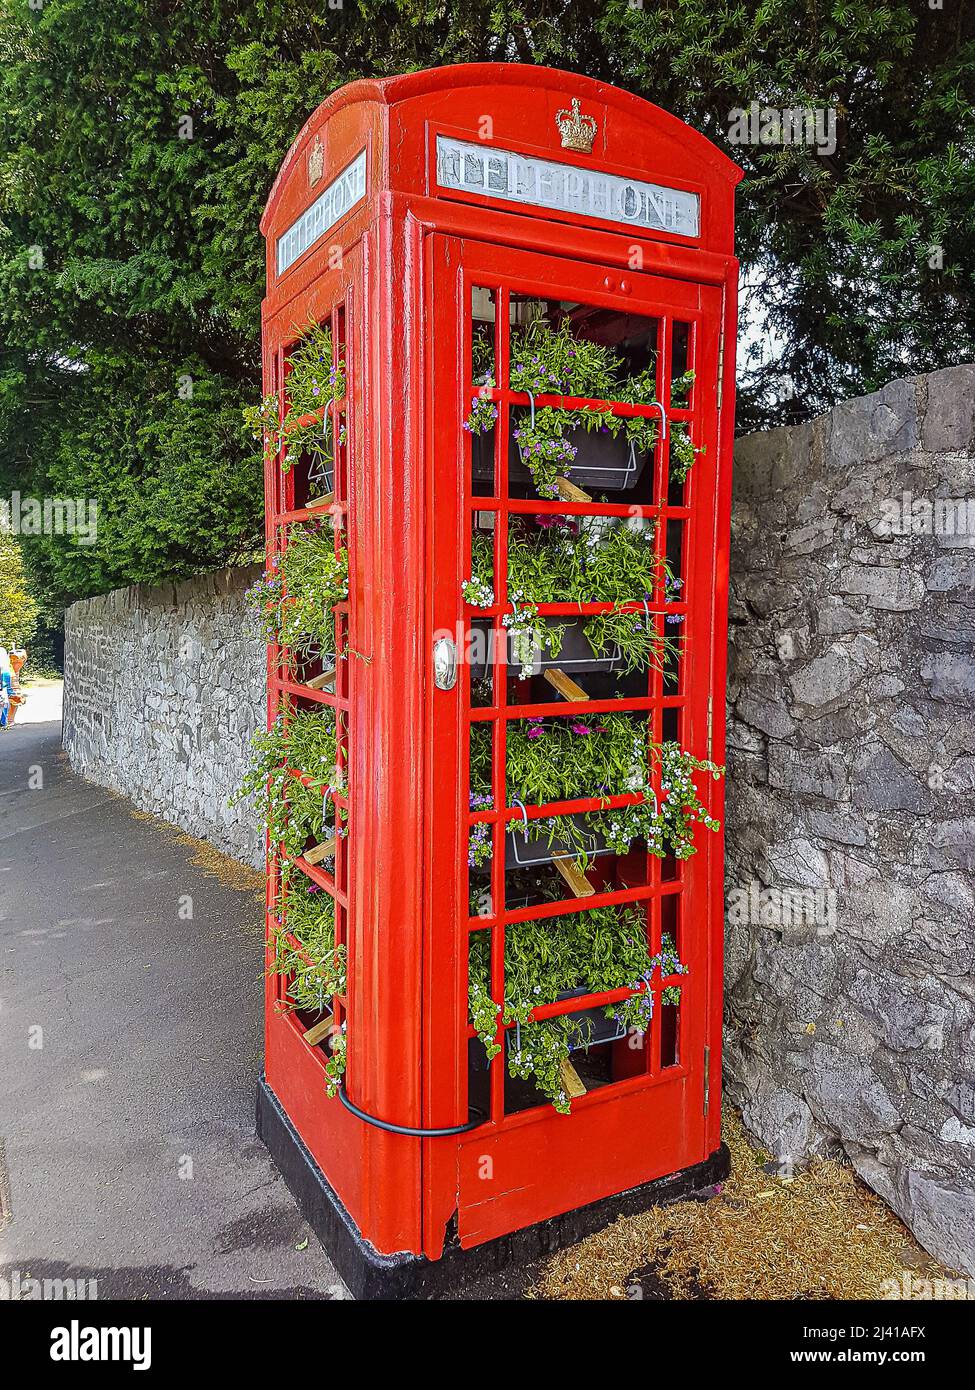 A traditional British red public telephone box filled with plants up against a stone wall. Sneyd Park, Bristol. UK Stock Photo